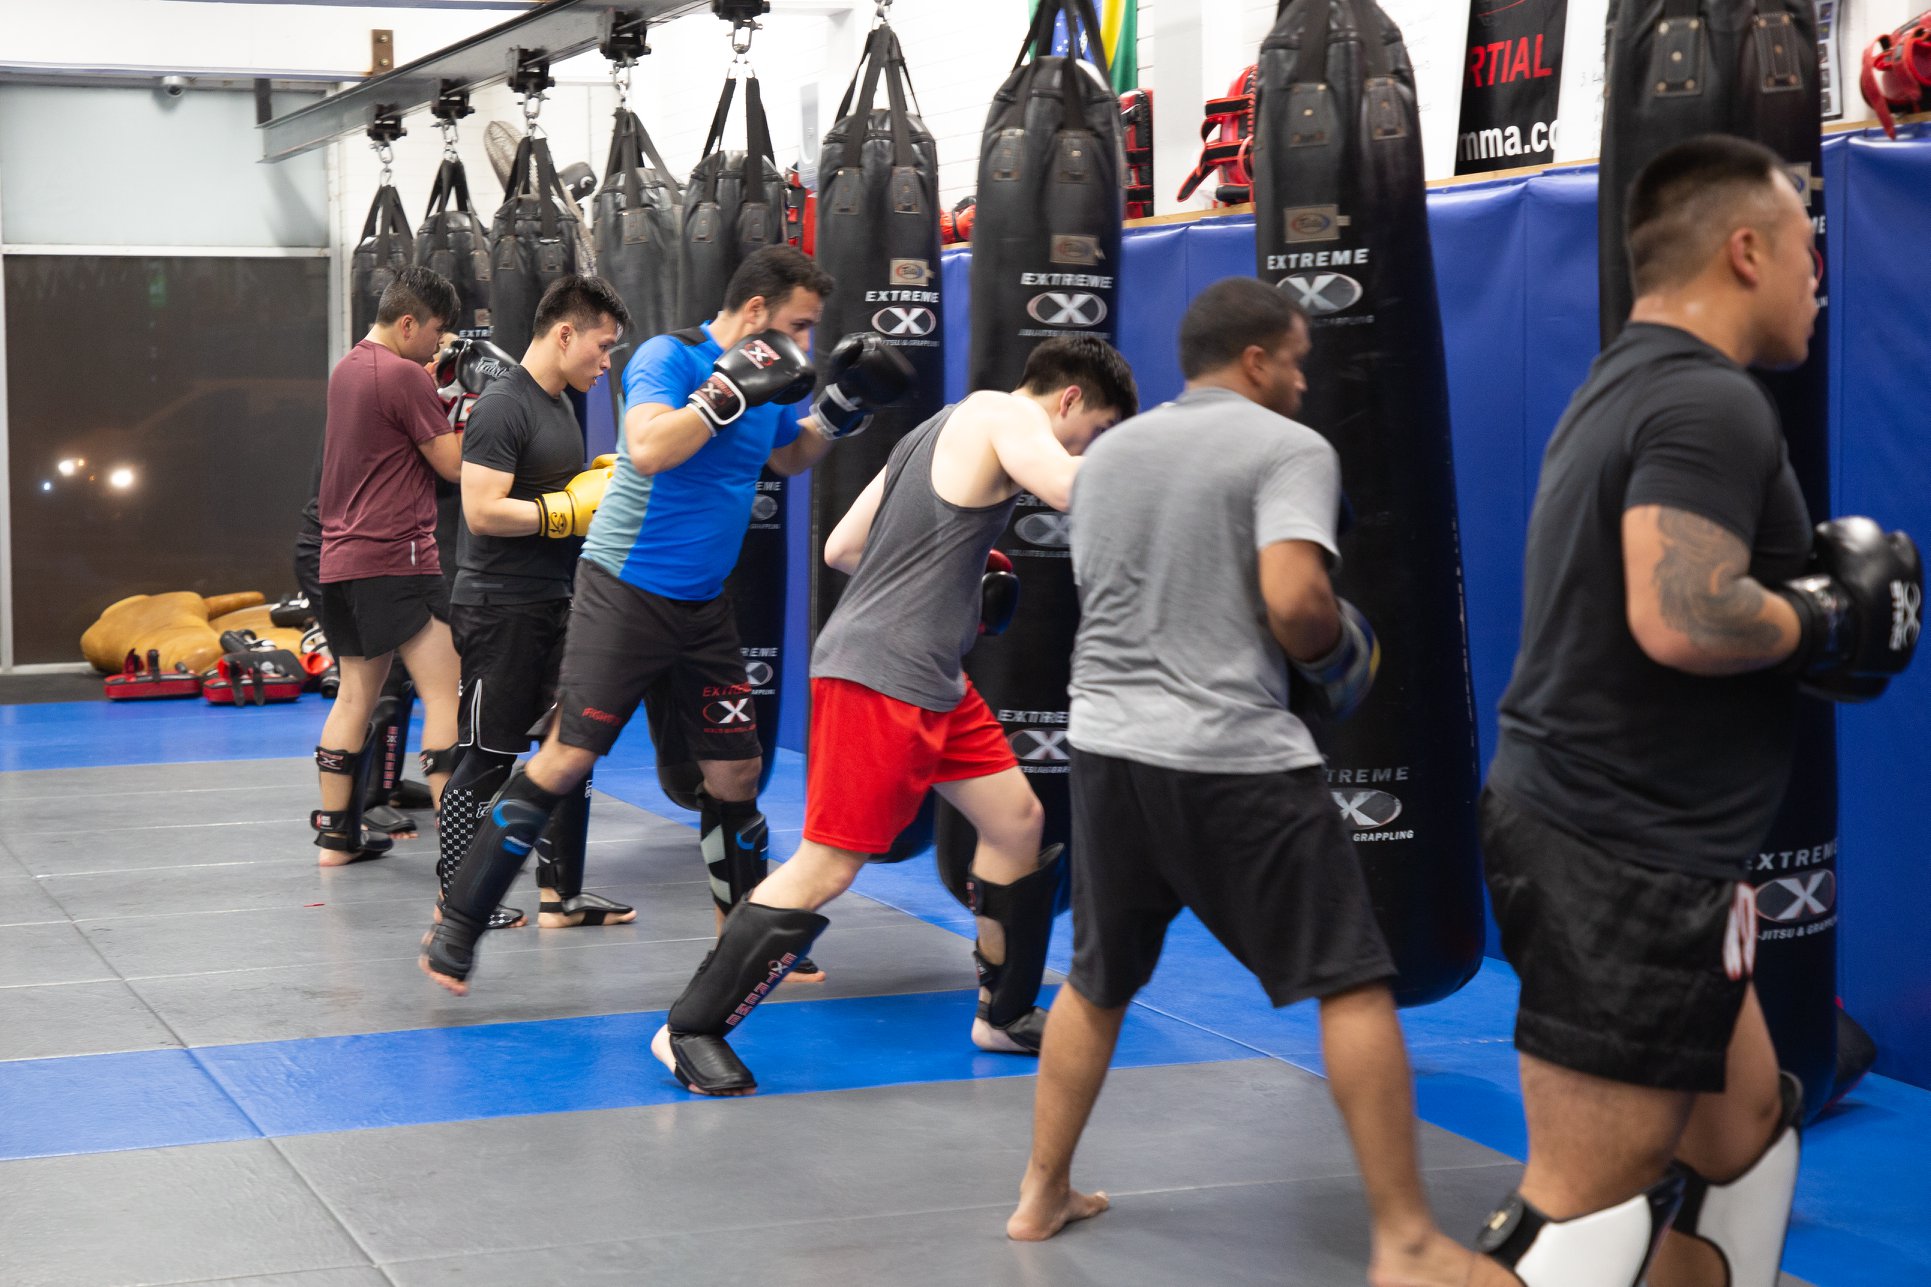 MMA Training is One of the Most Sustainable Ways to Keep Fit - Here's Why -  Extreme MMA